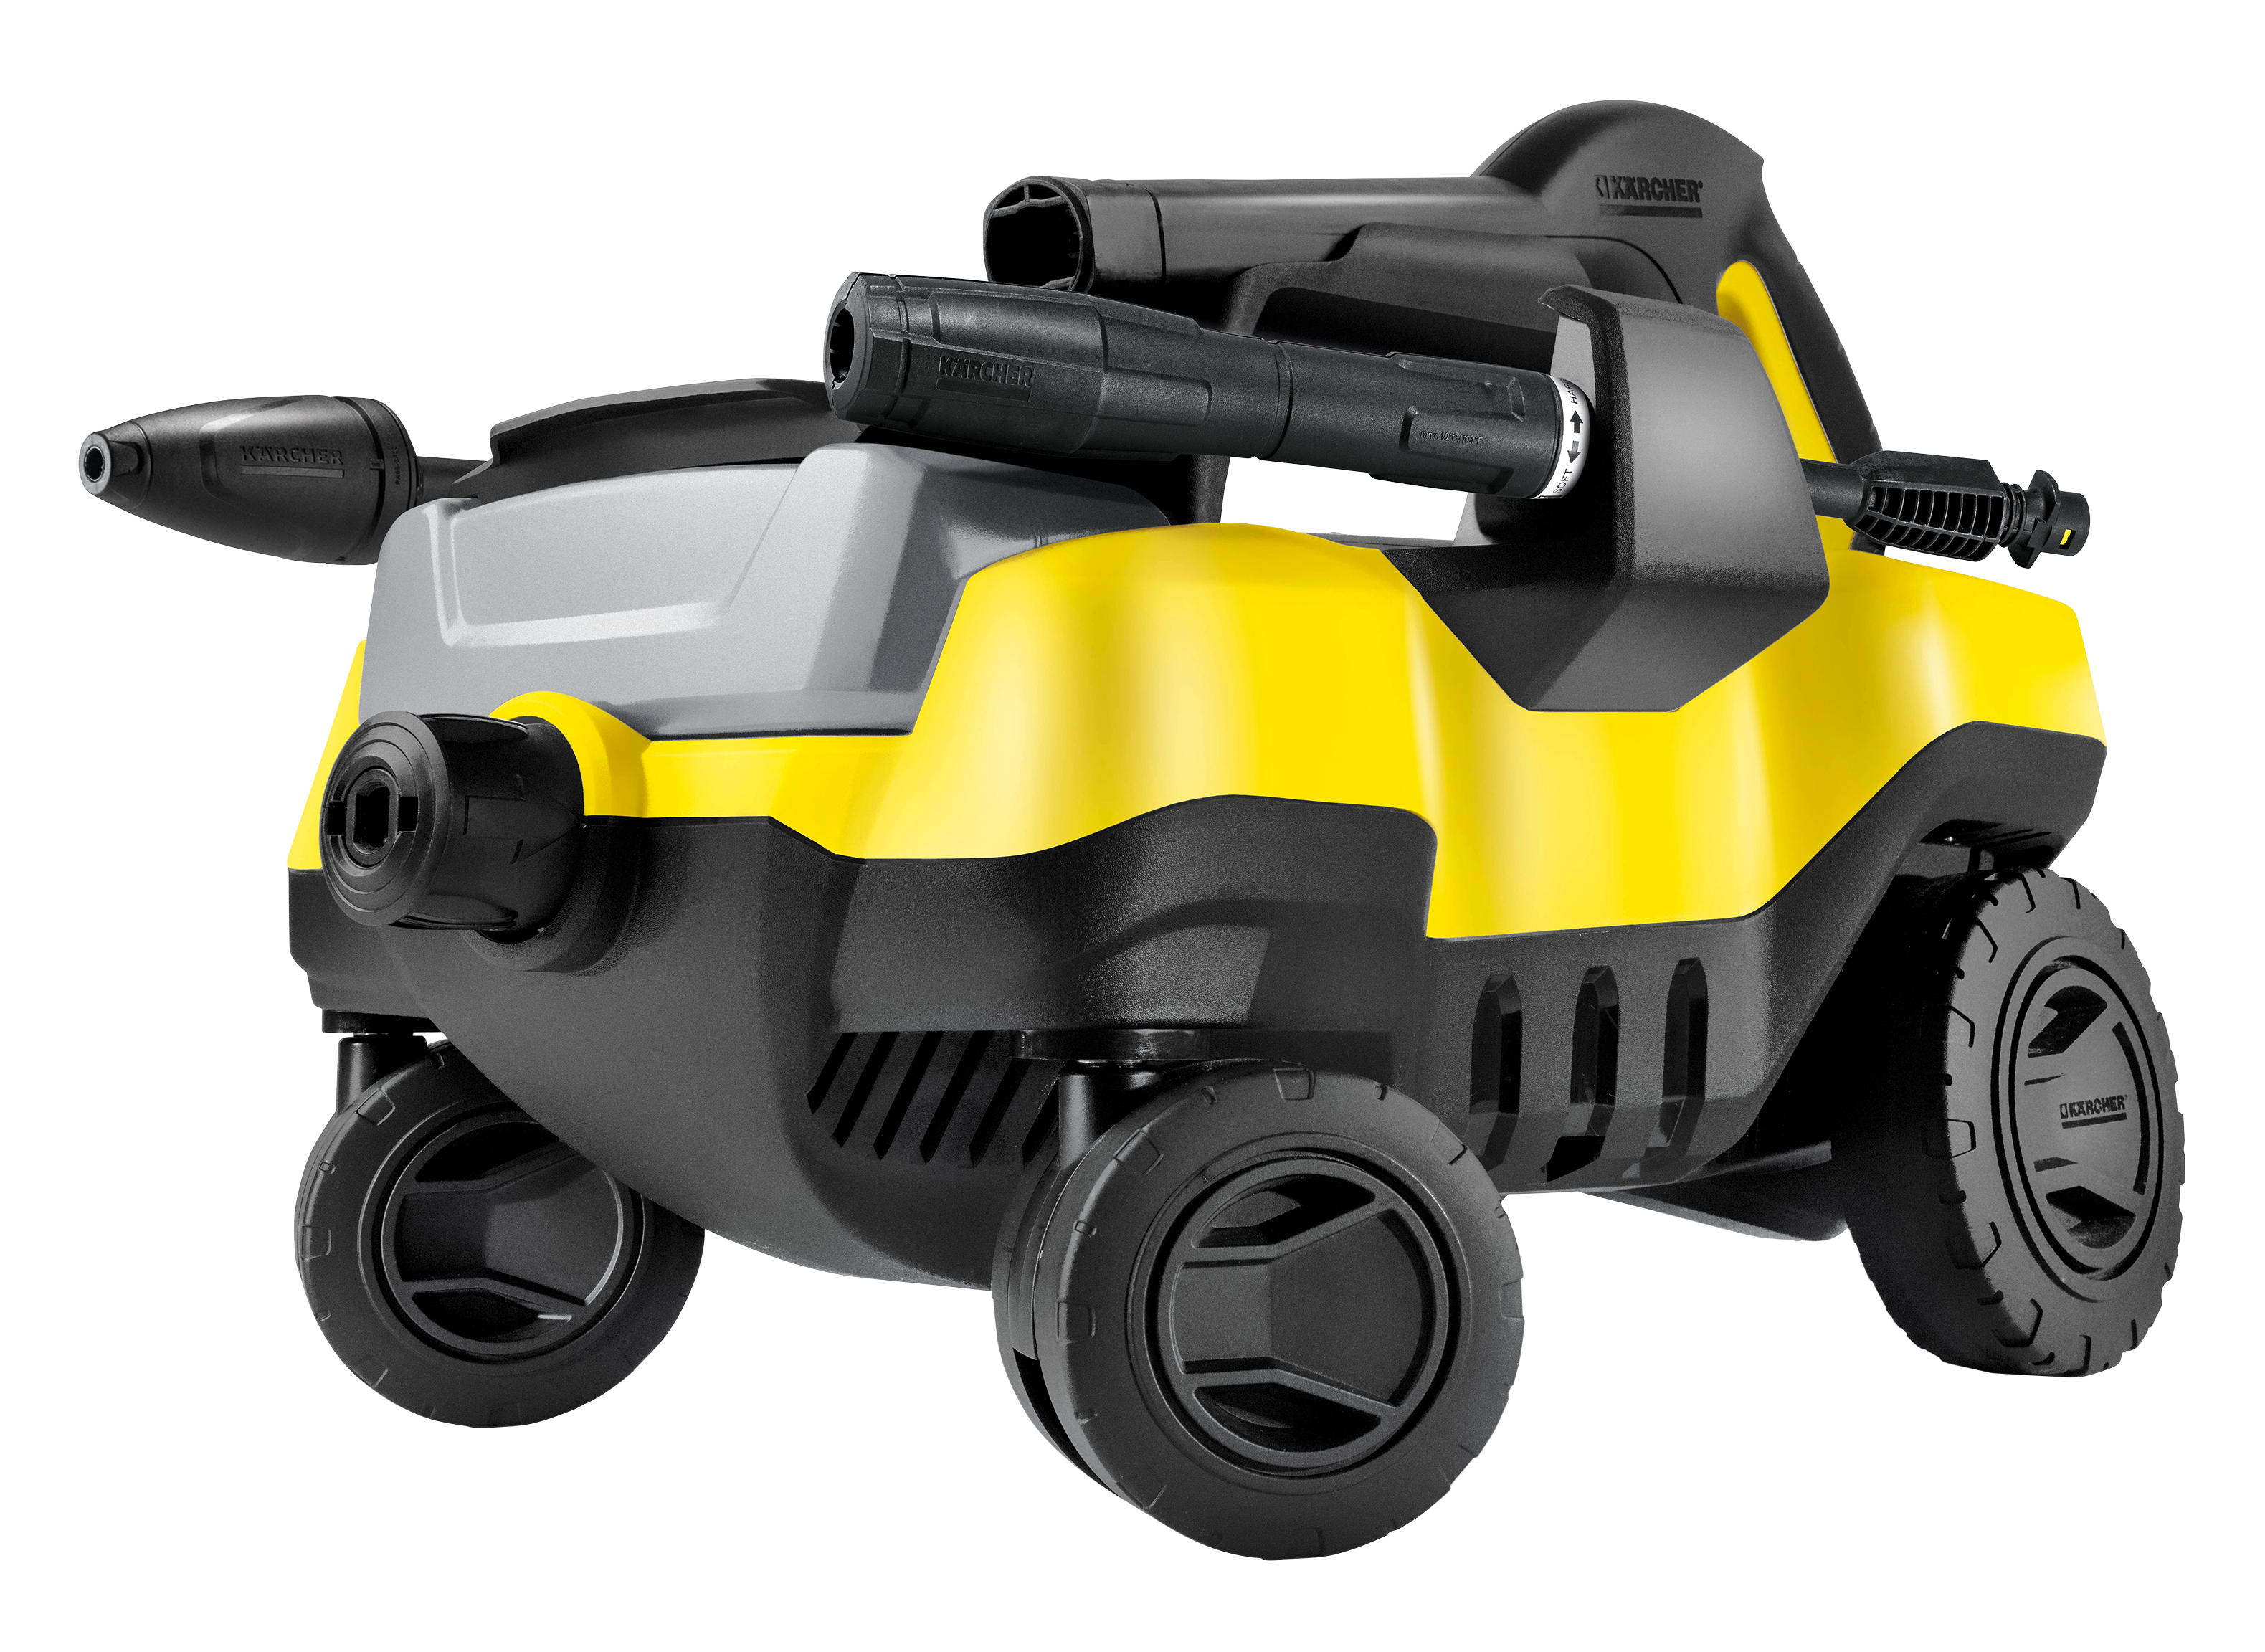 Karcher K3 Follow Me Pressure Washer Review - Consumer Reports